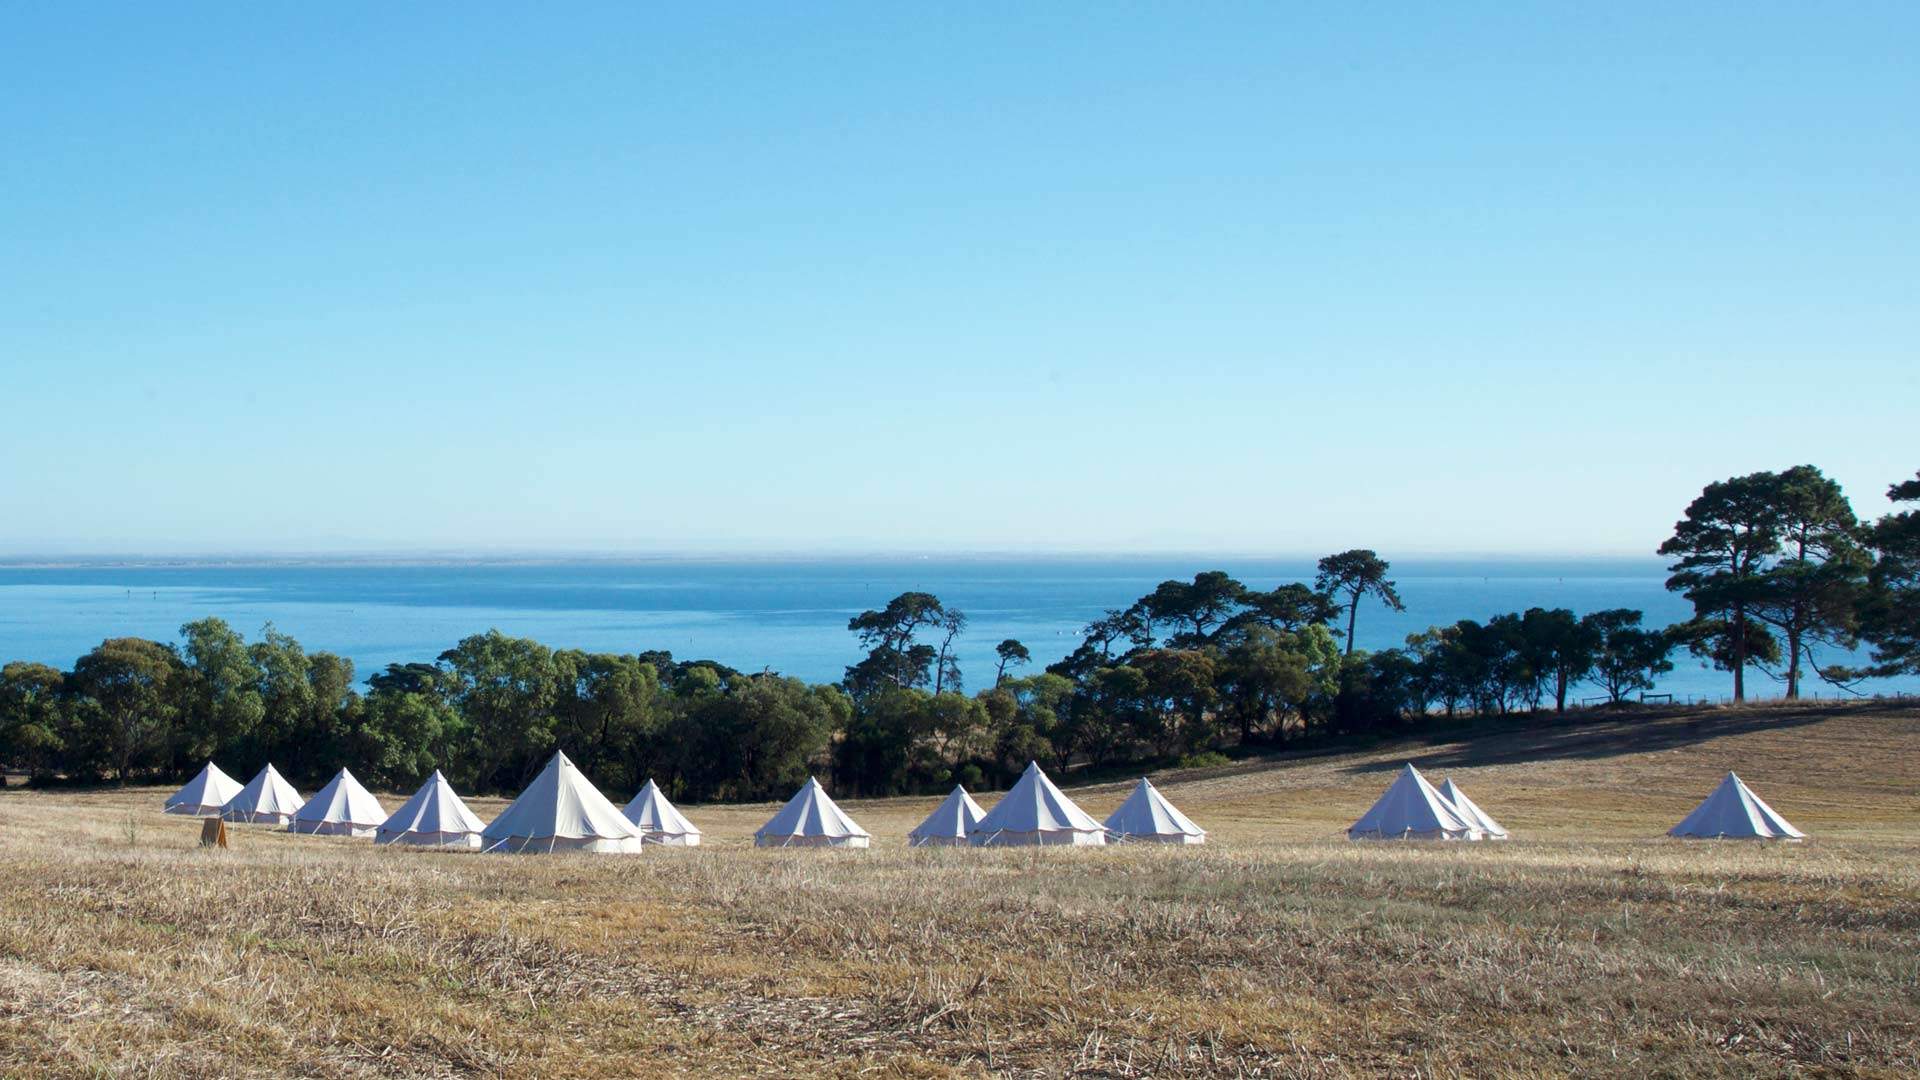 Terindah Estate Winery's Glamping Retreat with Its Own Private Beach Is Back for Summer